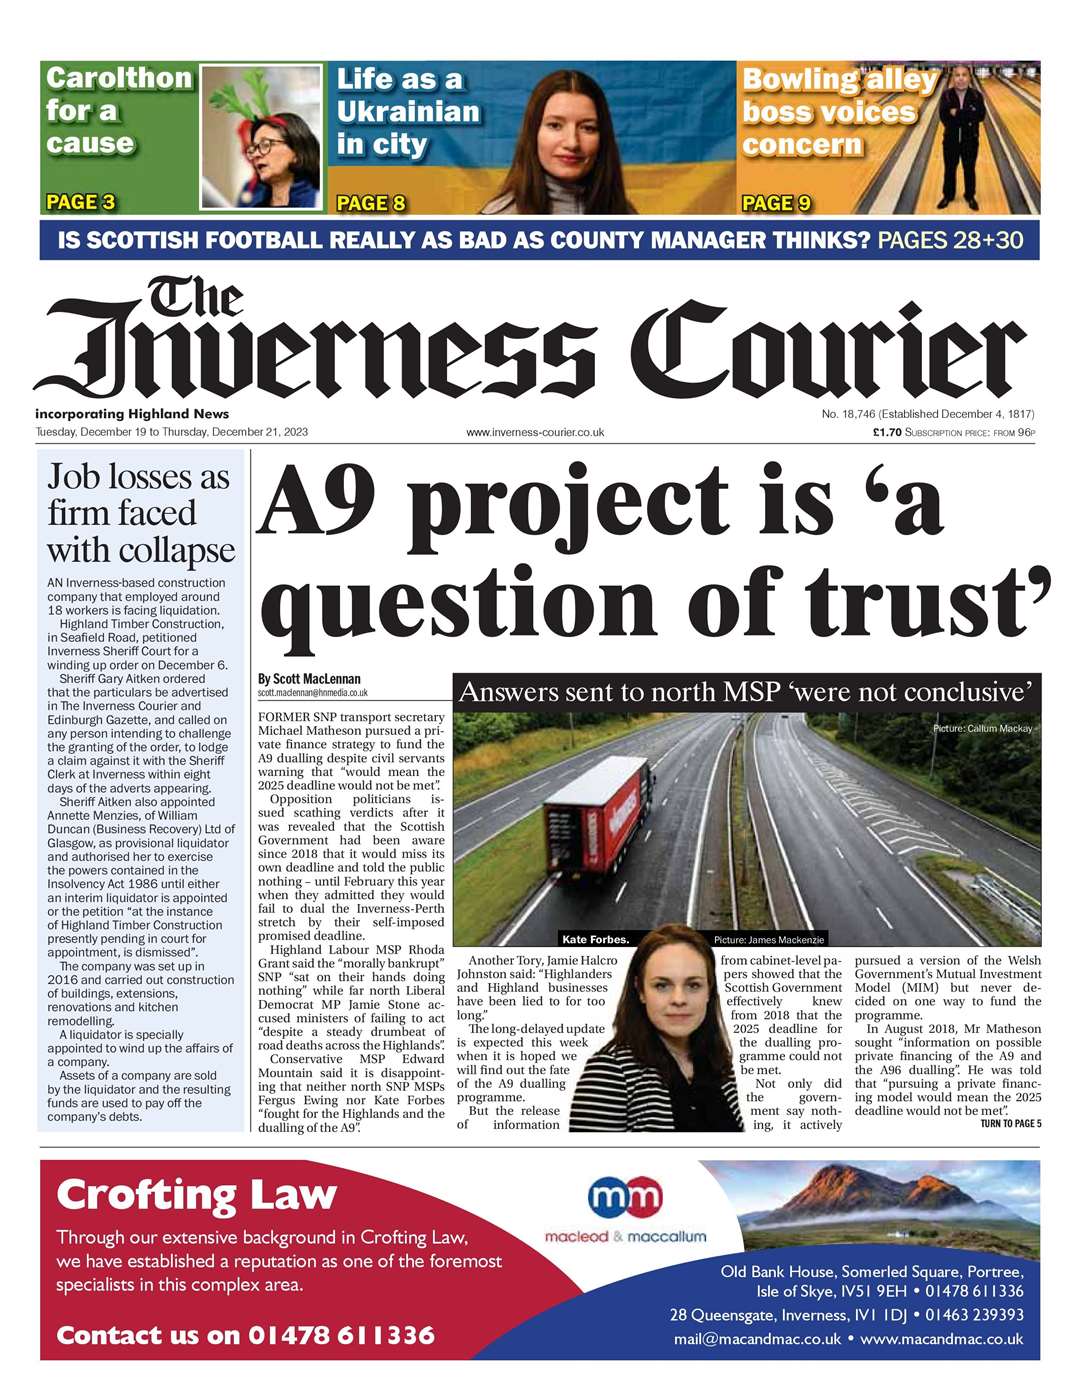 The Inverness Courier, December 19, front page.